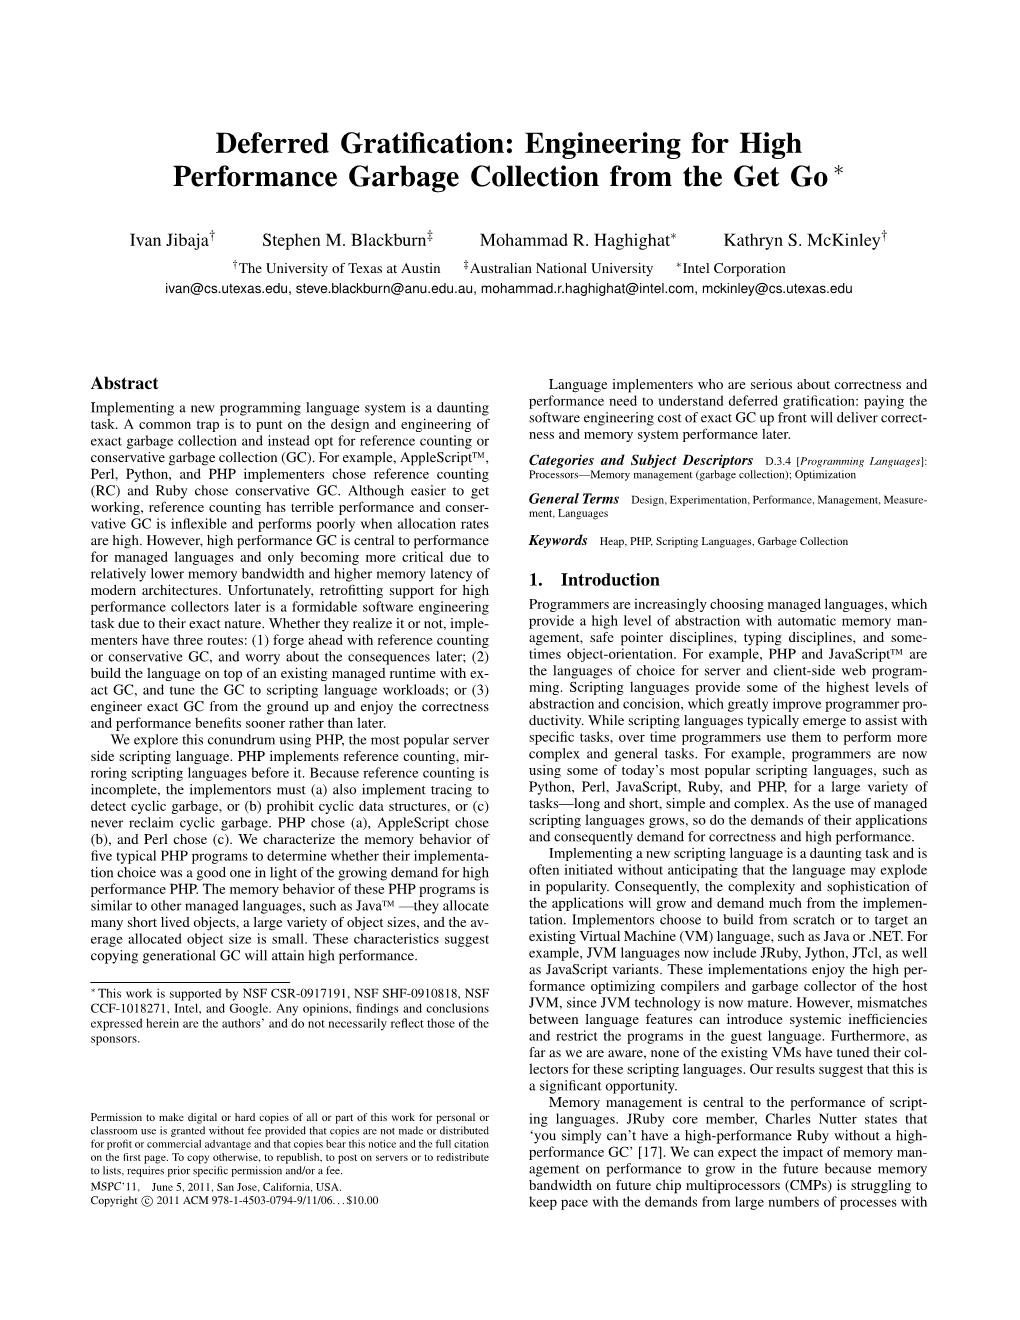 Deferred Gratification: Engineering for High Performance Garbage